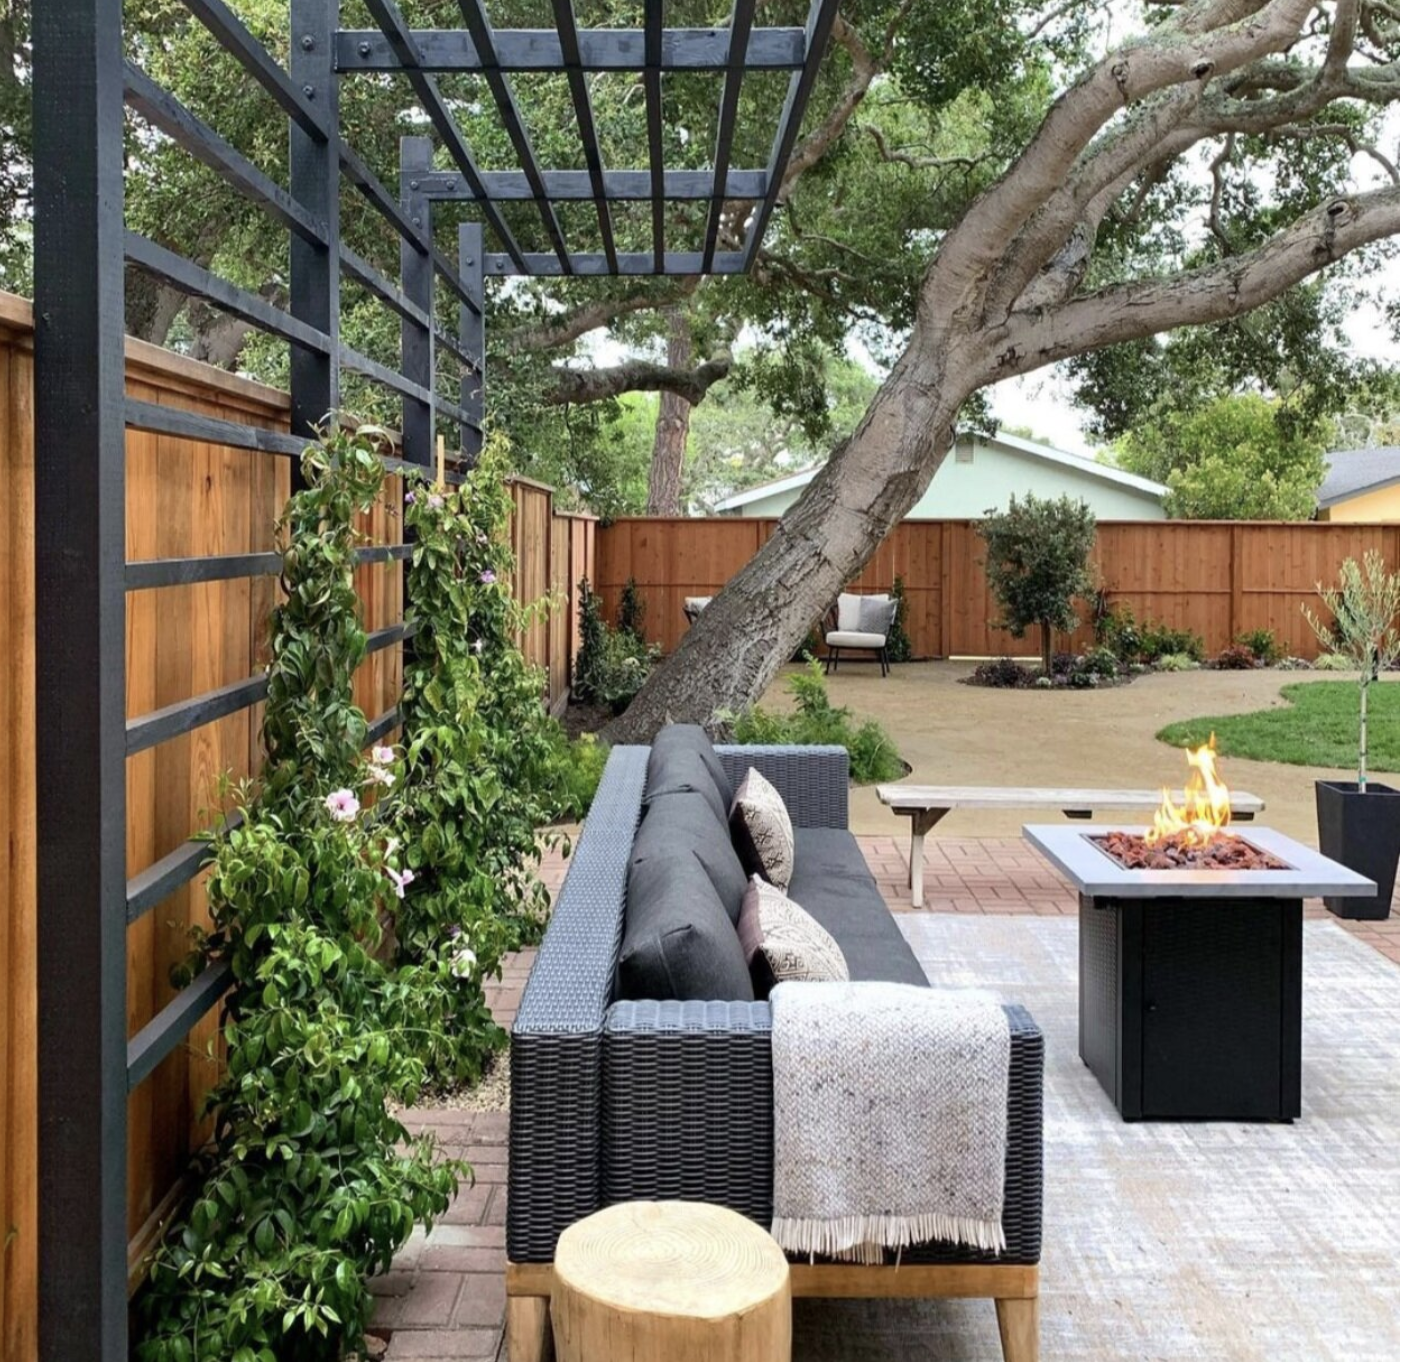 Fenced yard with a sitting area around a fire pit, trellis, and plants